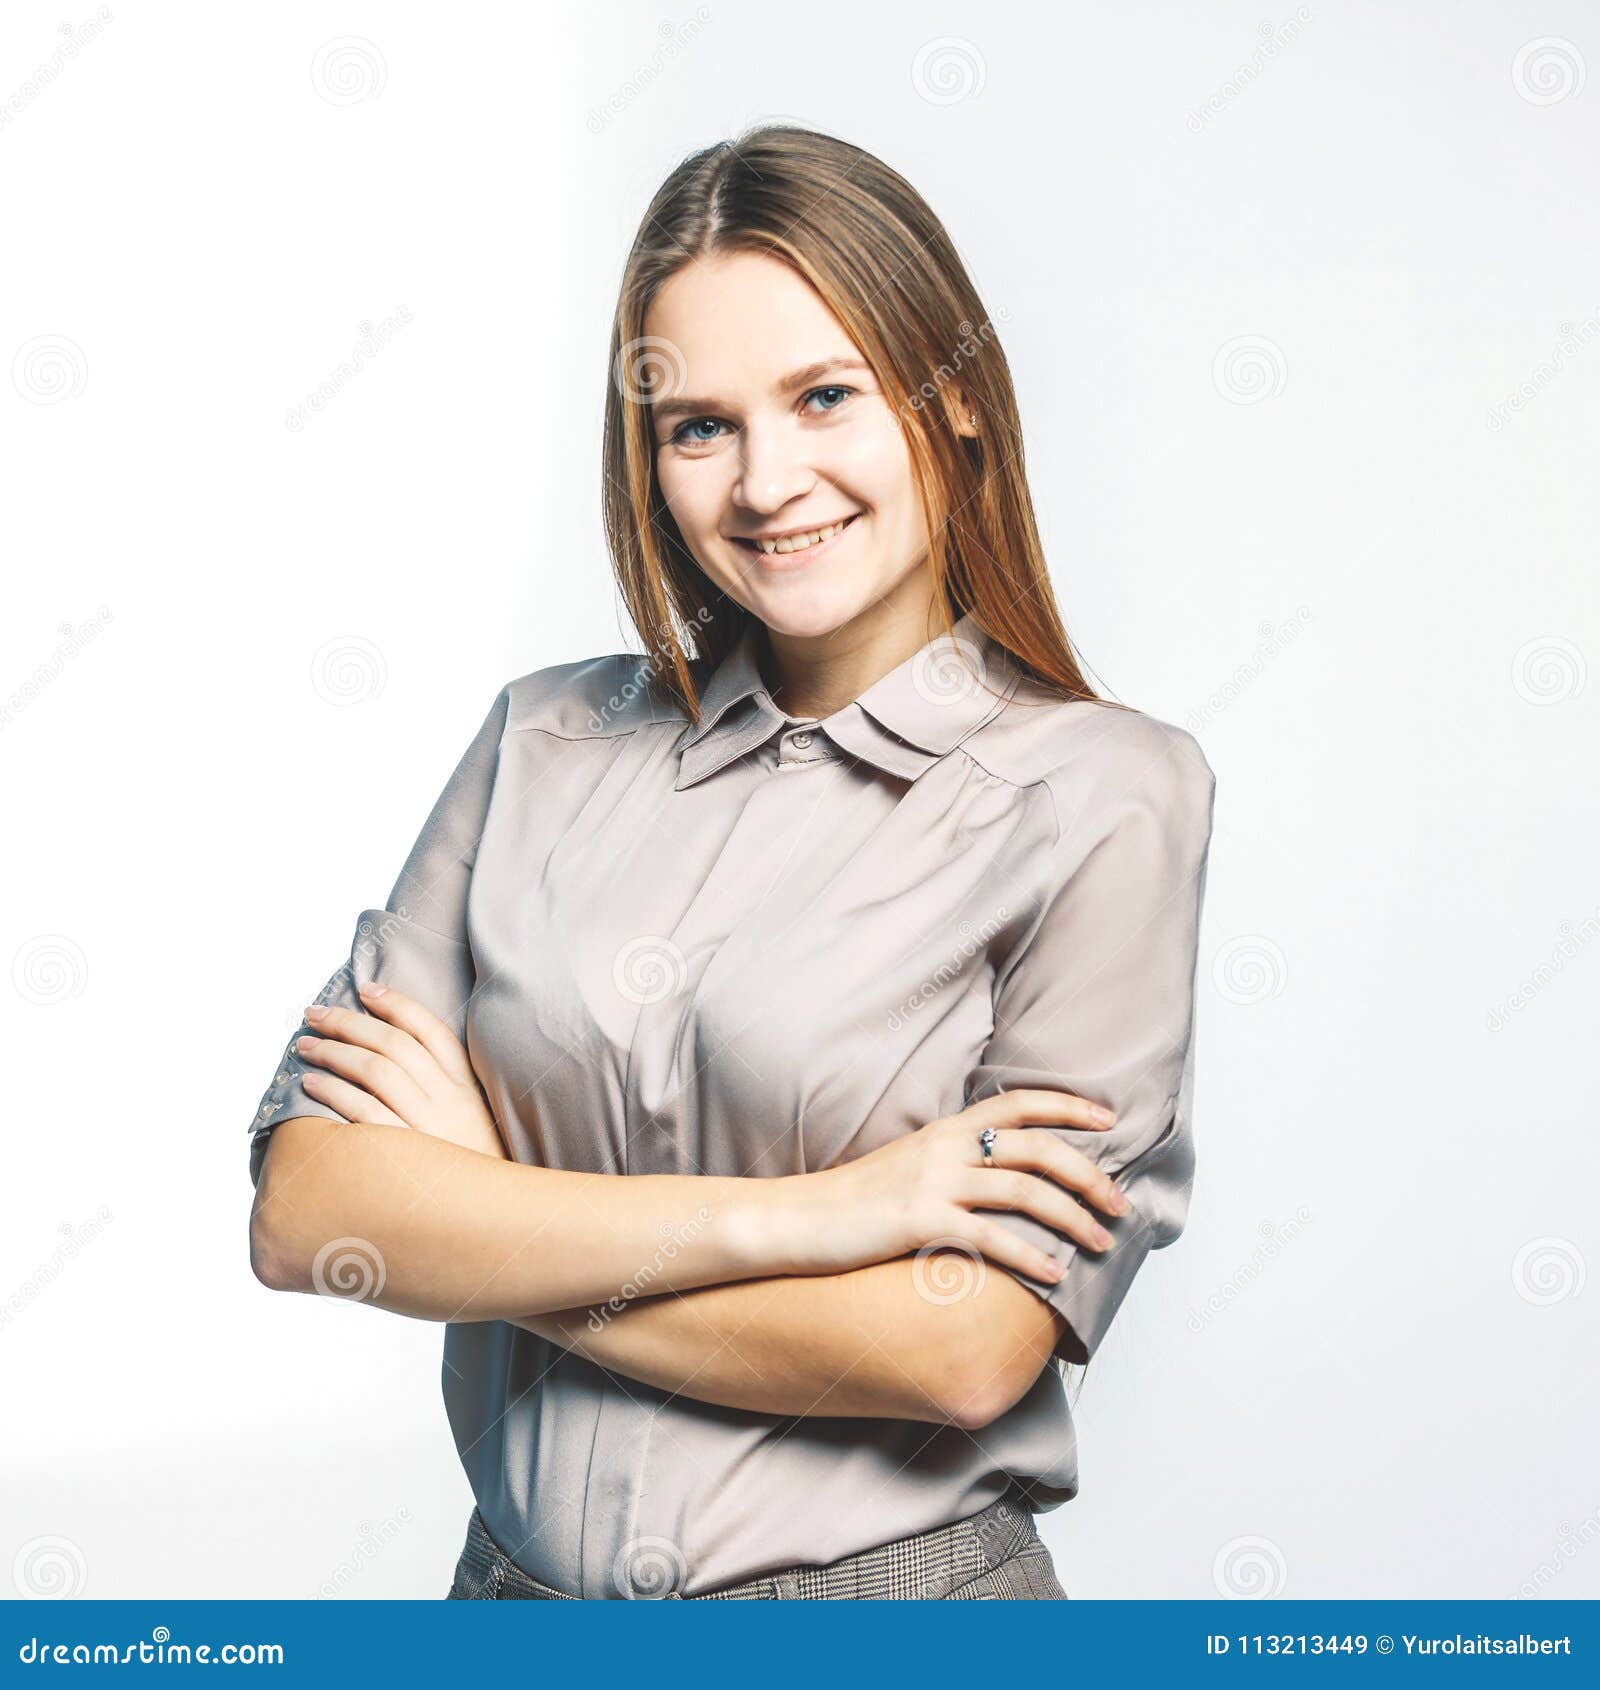 Portrait Of A Woman Administrator On A White Background. Stock Image